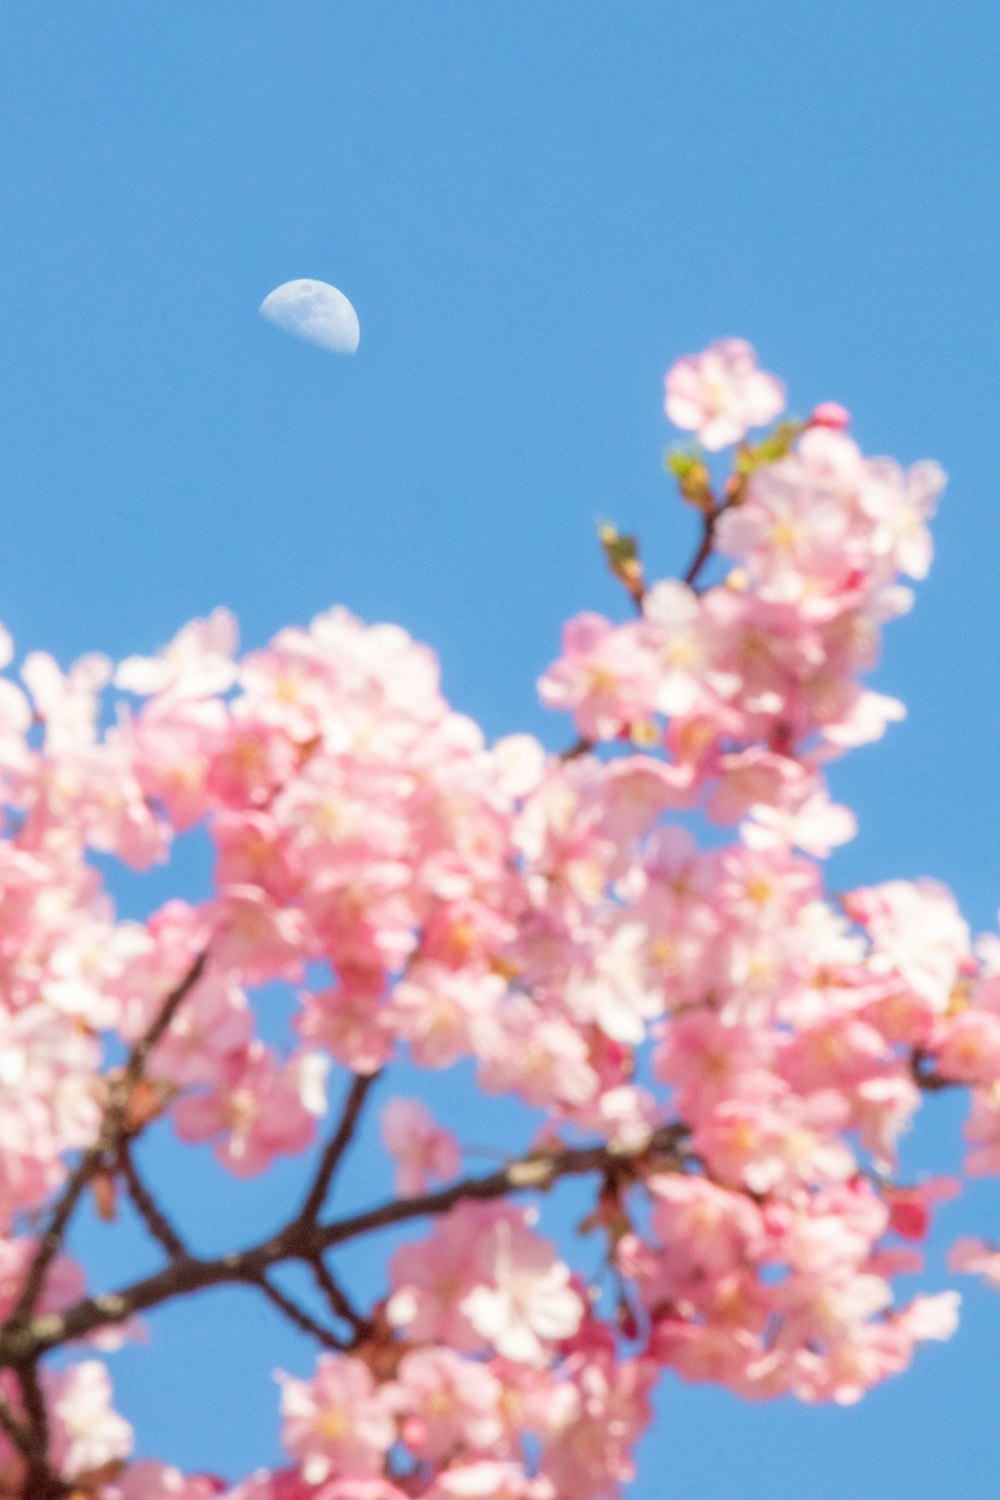 the moon is seen through the branches of a cherry blossom tree